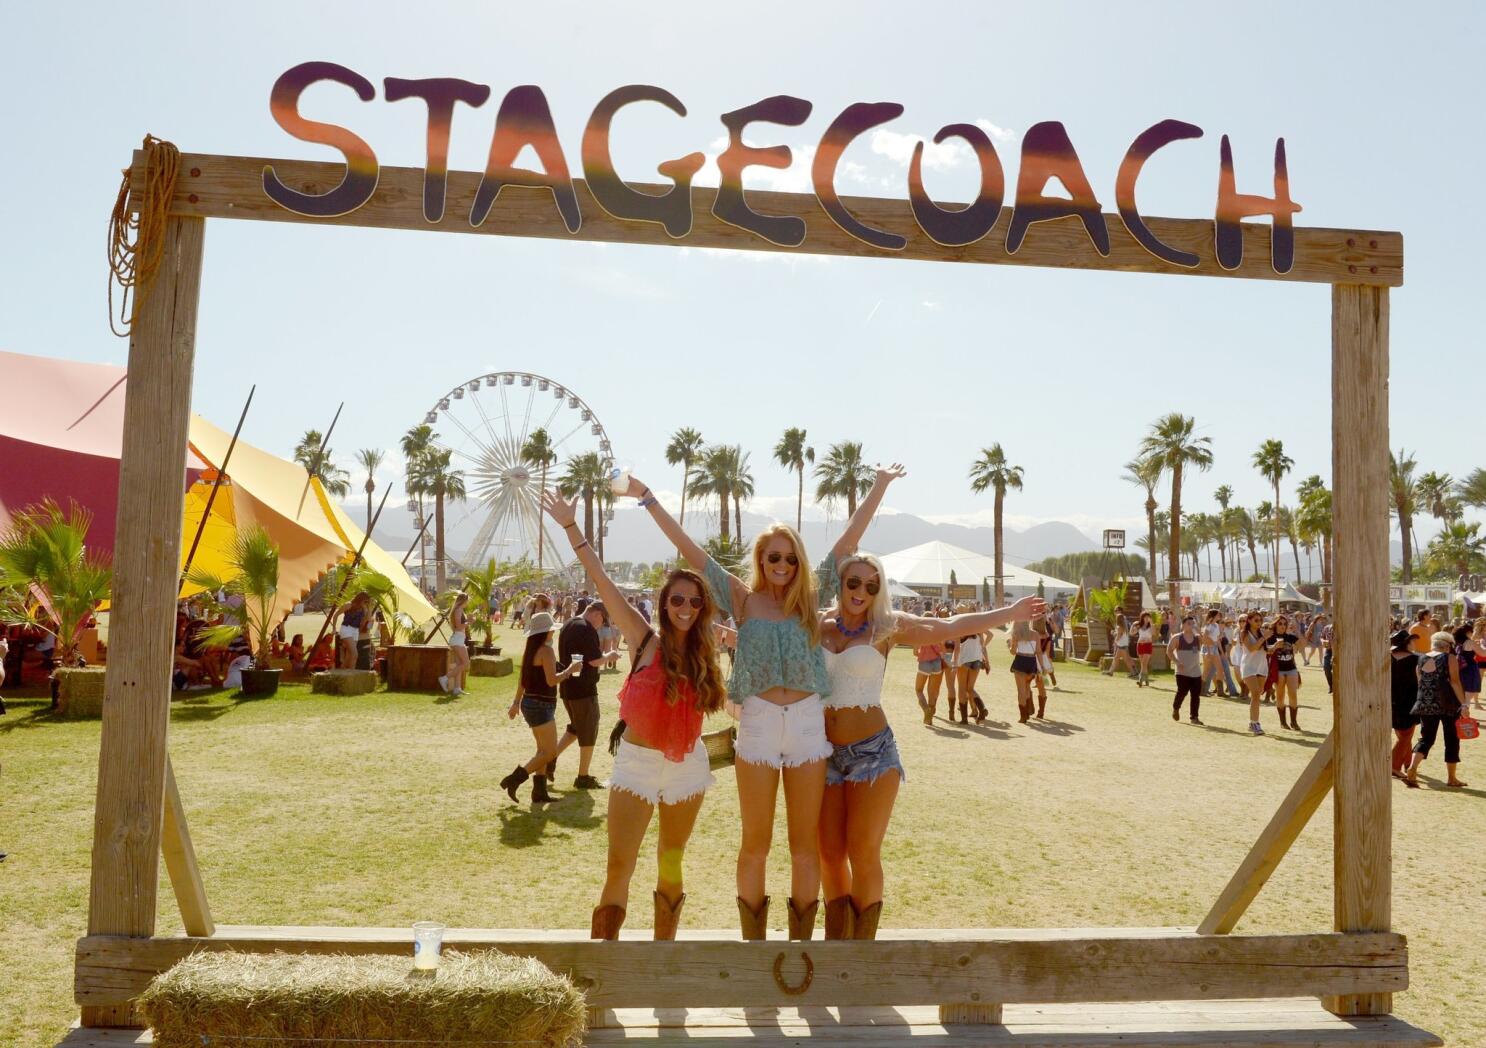 Stagecoach fashion: Which one are you? - The San Diego Union-Tribune